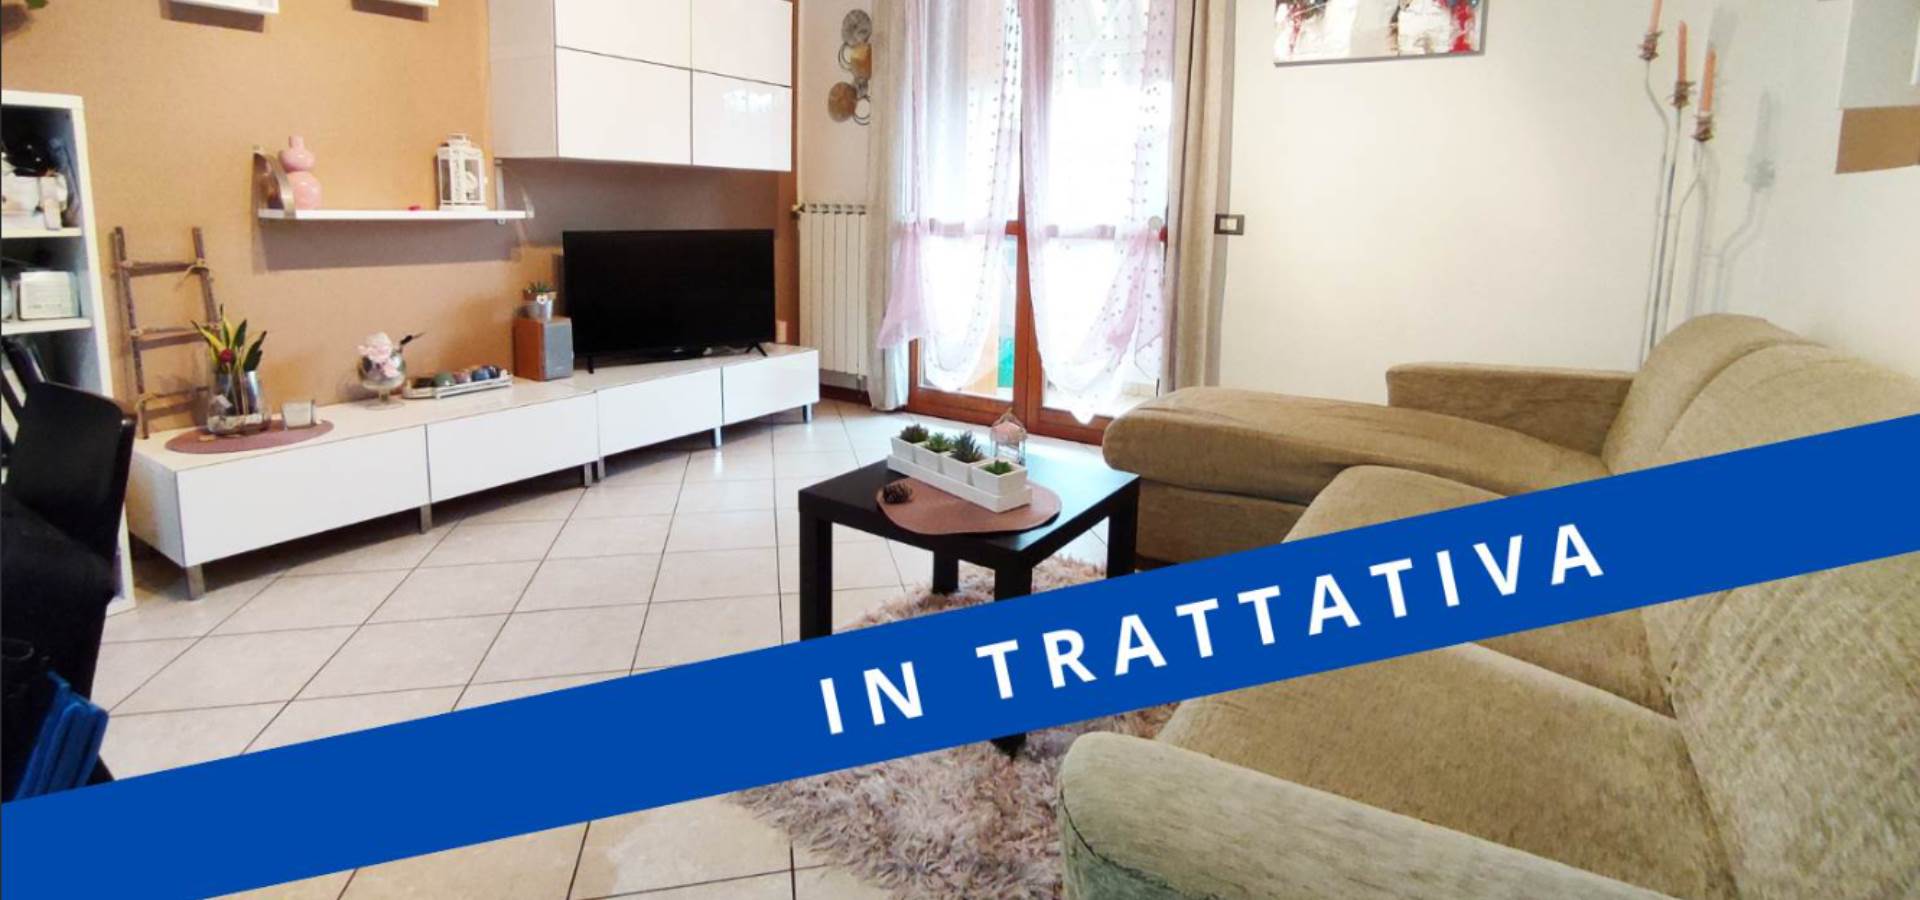 FOSSALTA DI PORTOGRUARO, Apartment for sale of 72 Sq. mt., Good condition, Heating Individual heating system, Energetic class: C, placed at 1° on 1, 